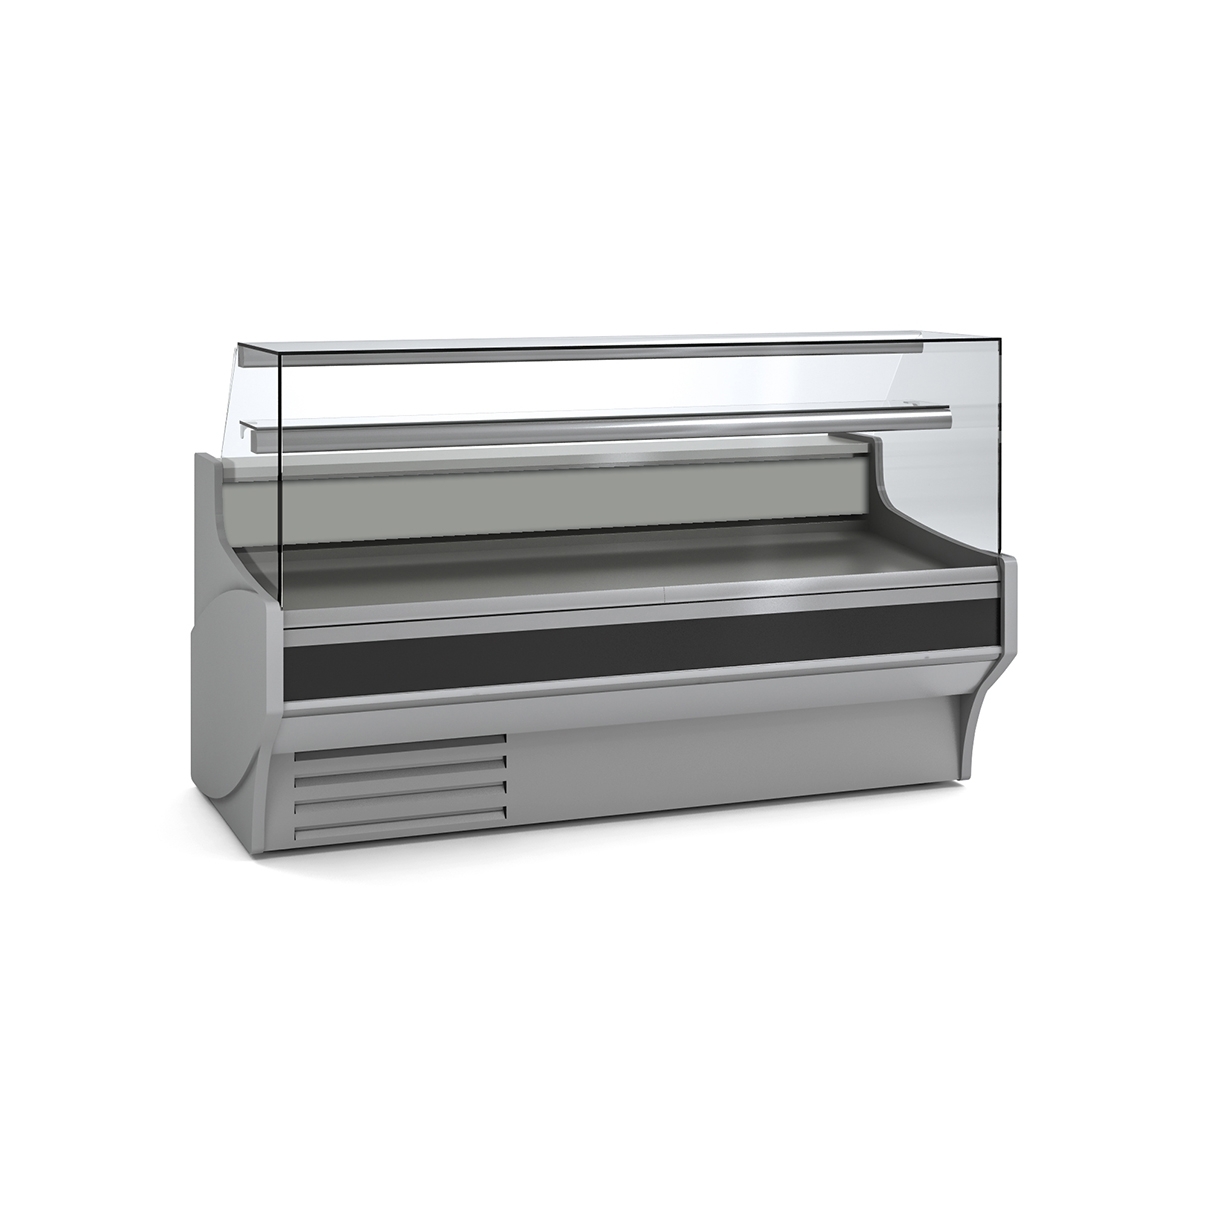 REFRIGERATED DISPLAY CABINET VE-9-RR-TF